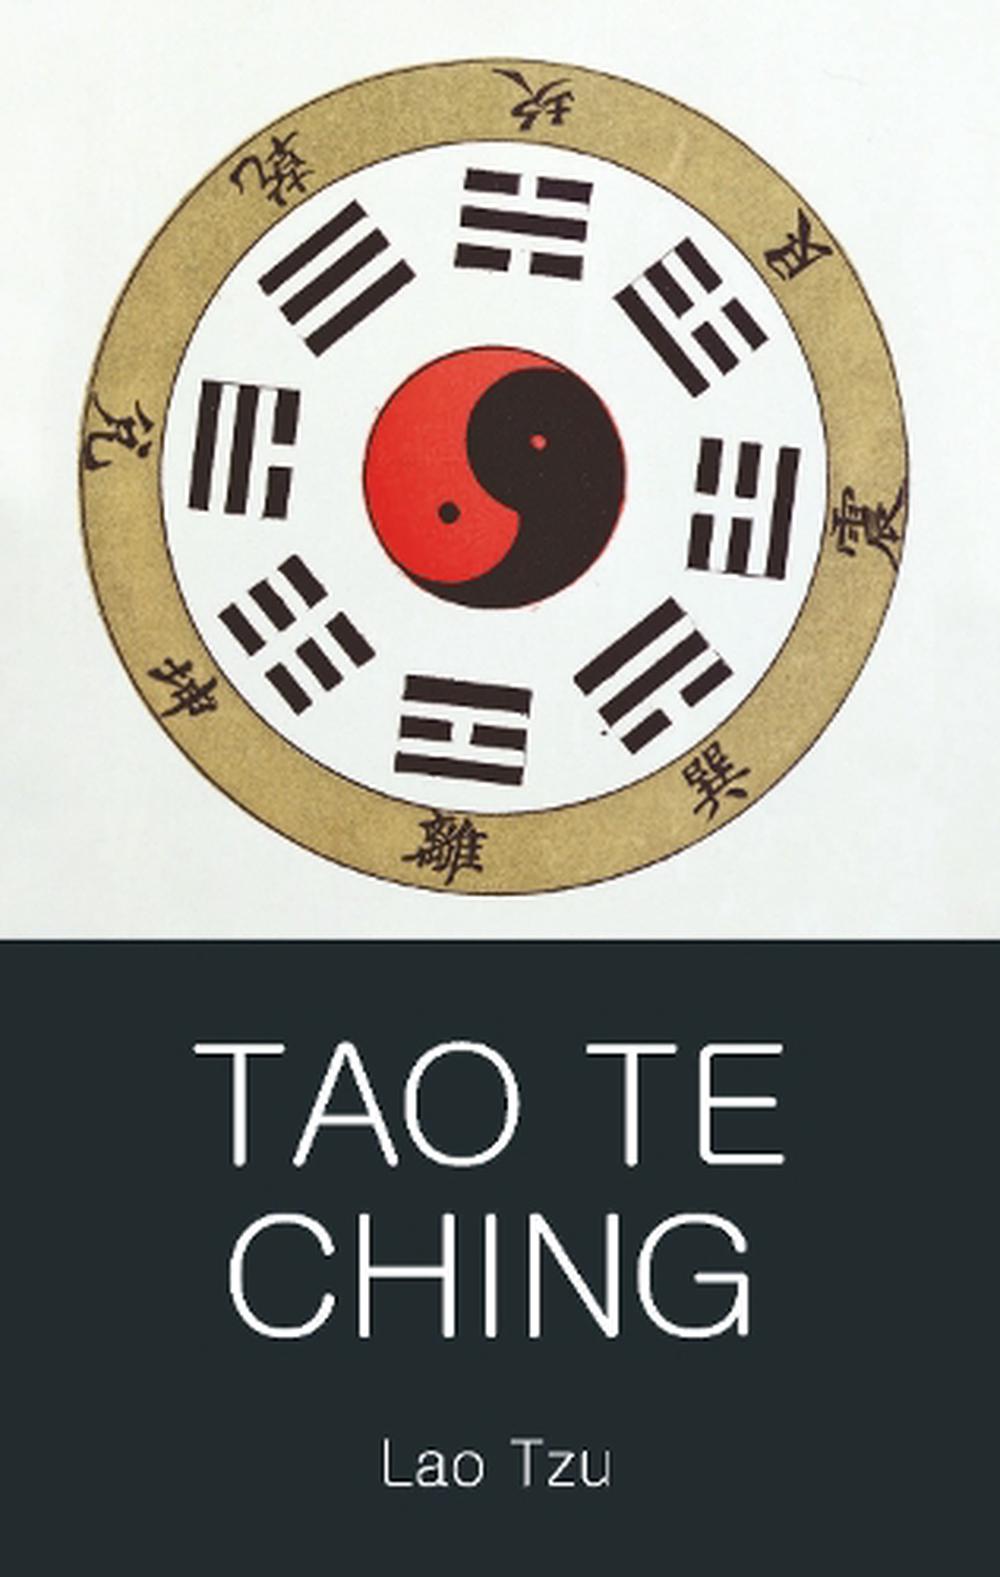 Tao Te Ching by Lao Tzu, Paperback, 9781853264719 | Buy online at The Nile